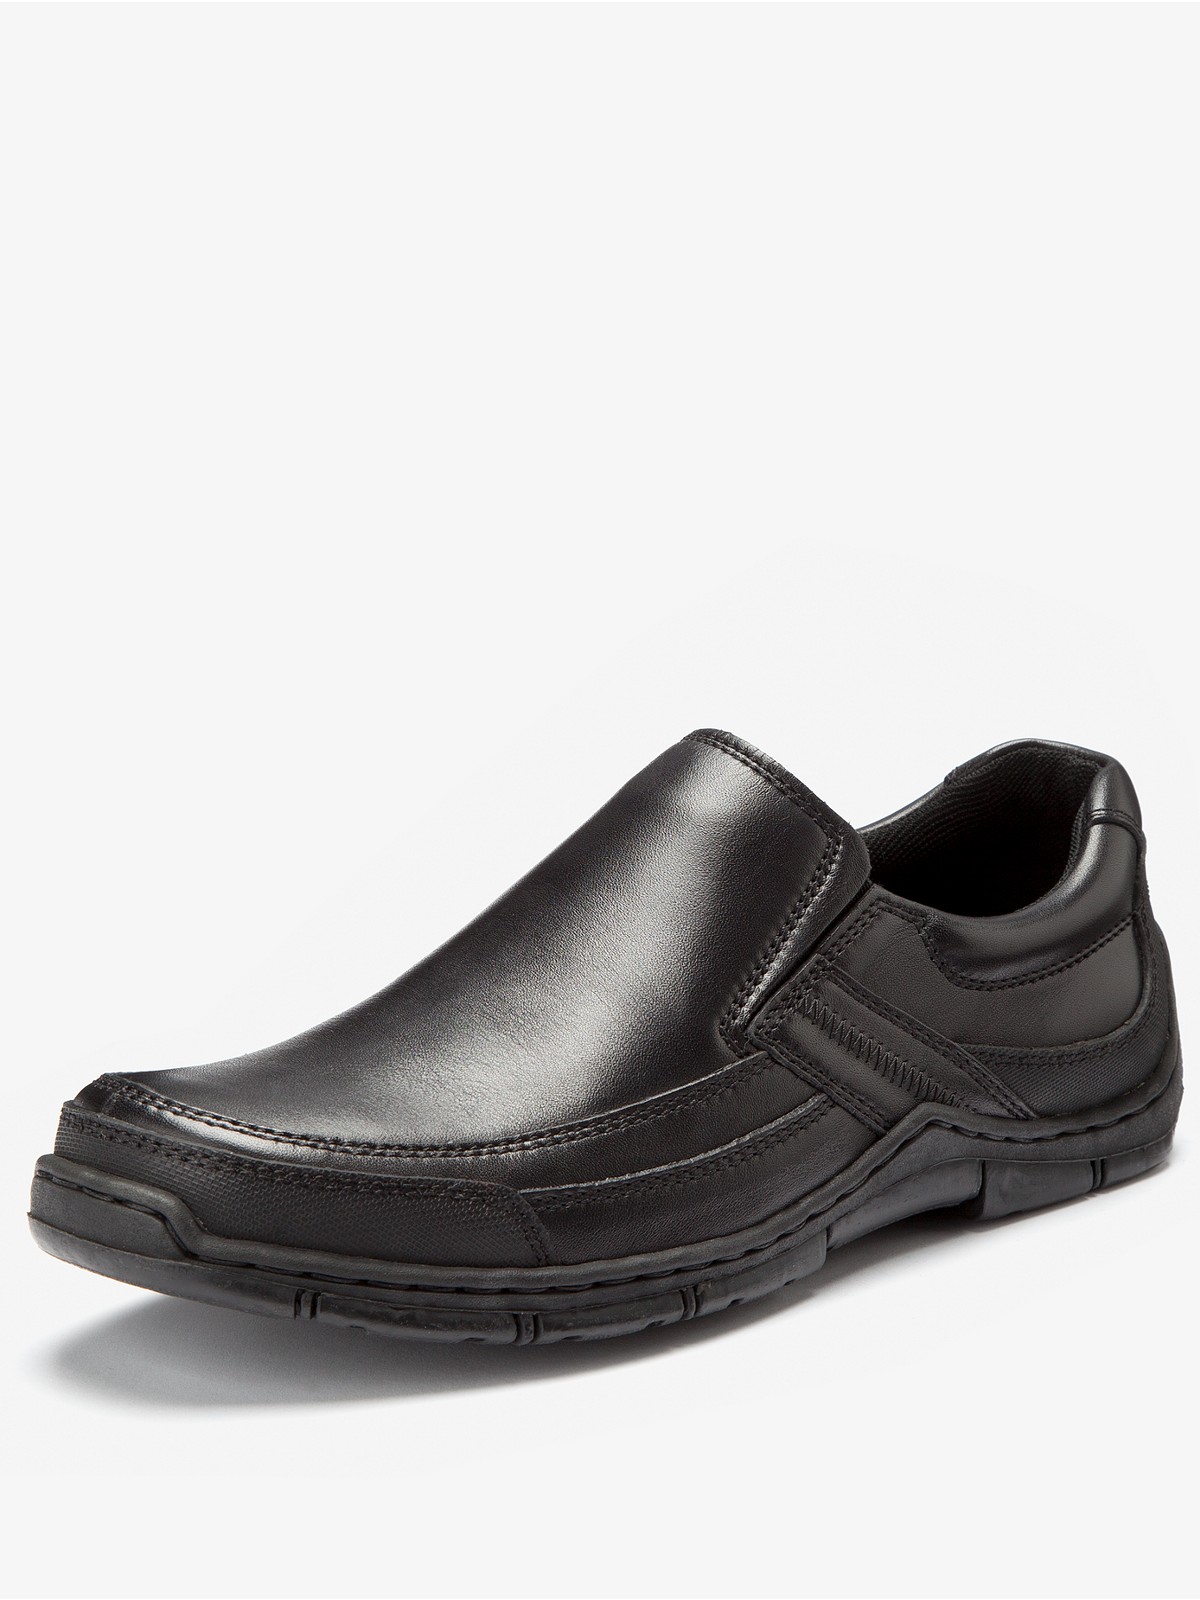 hush-puppies-black-hush-puppies-mens-stabilise-slip-on-shoes-product-1 ...